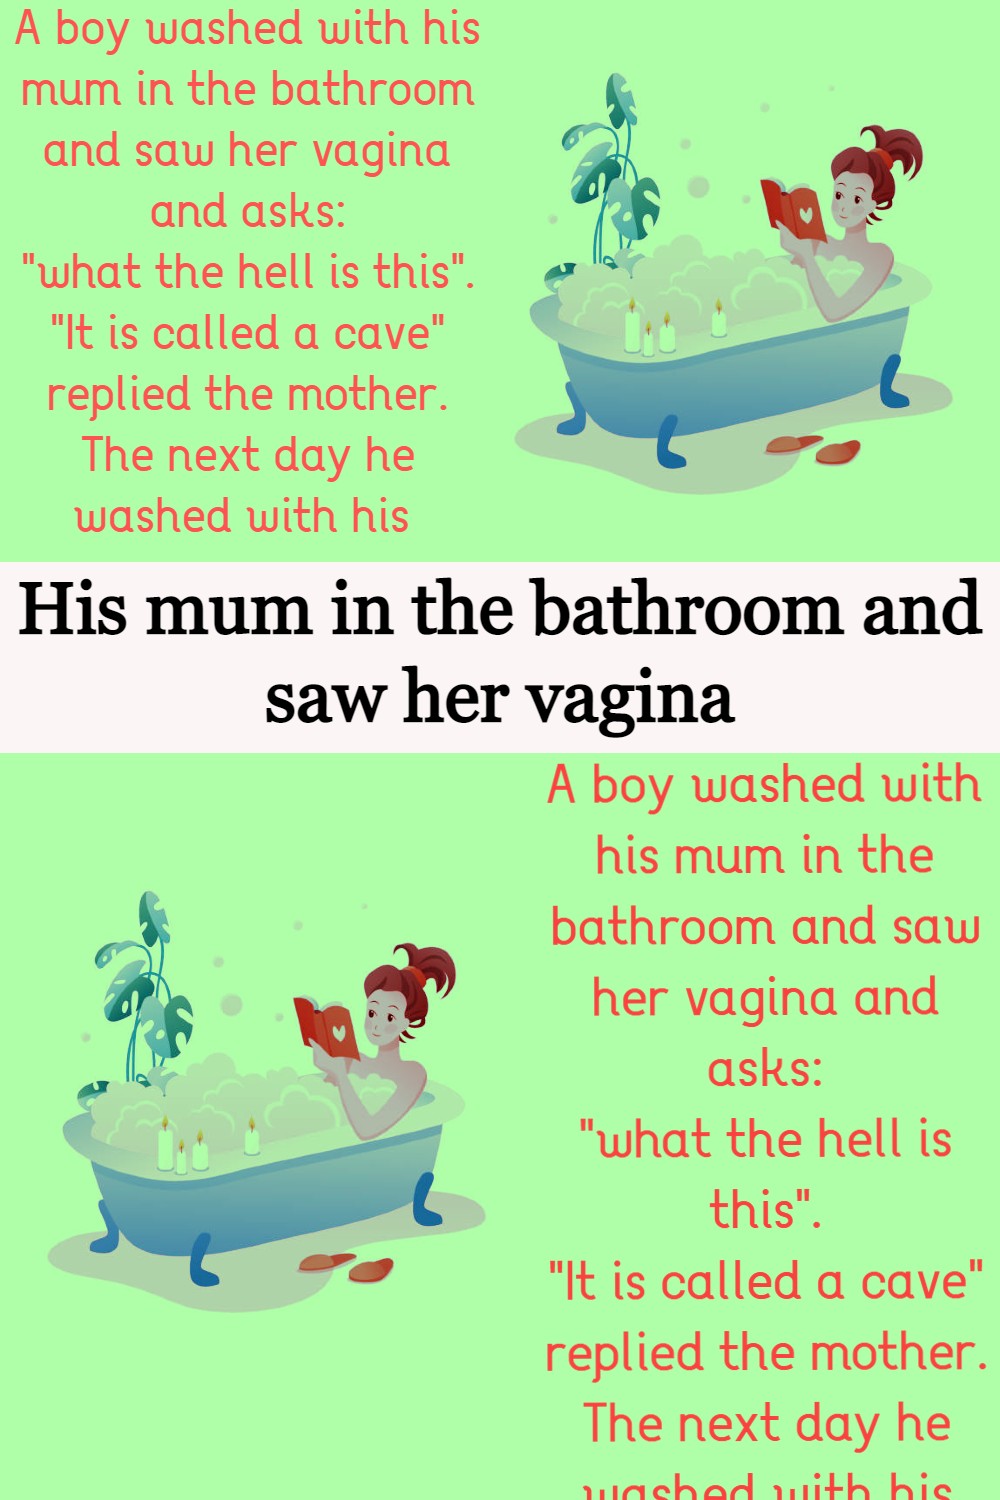 His mum in the bathroom and saw her vagina